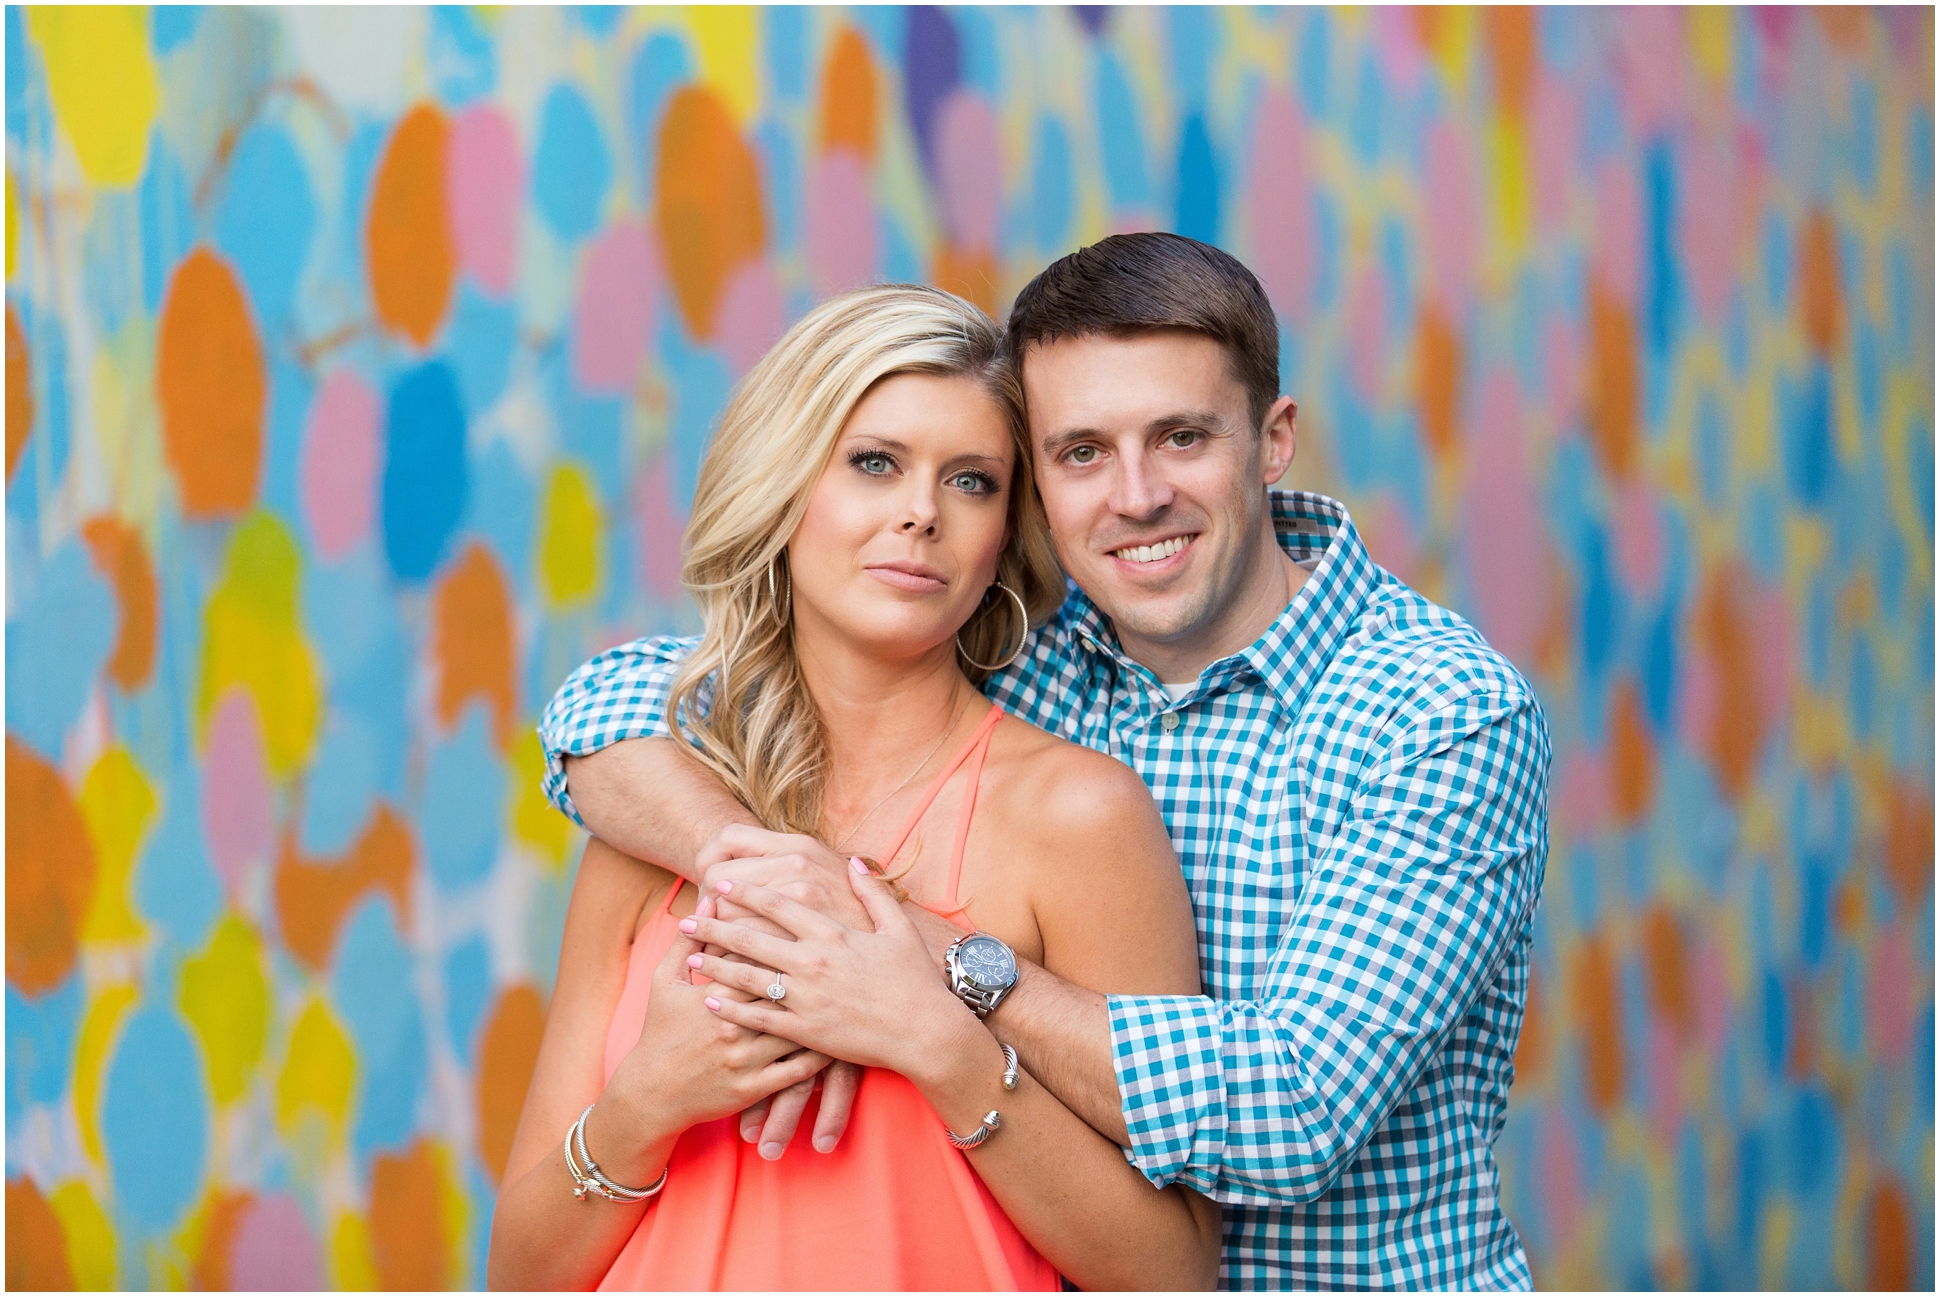 Ponce City Market and Atlanta Beltline Engagement Session | Two Chics Photography | www.twochicsphotography.com